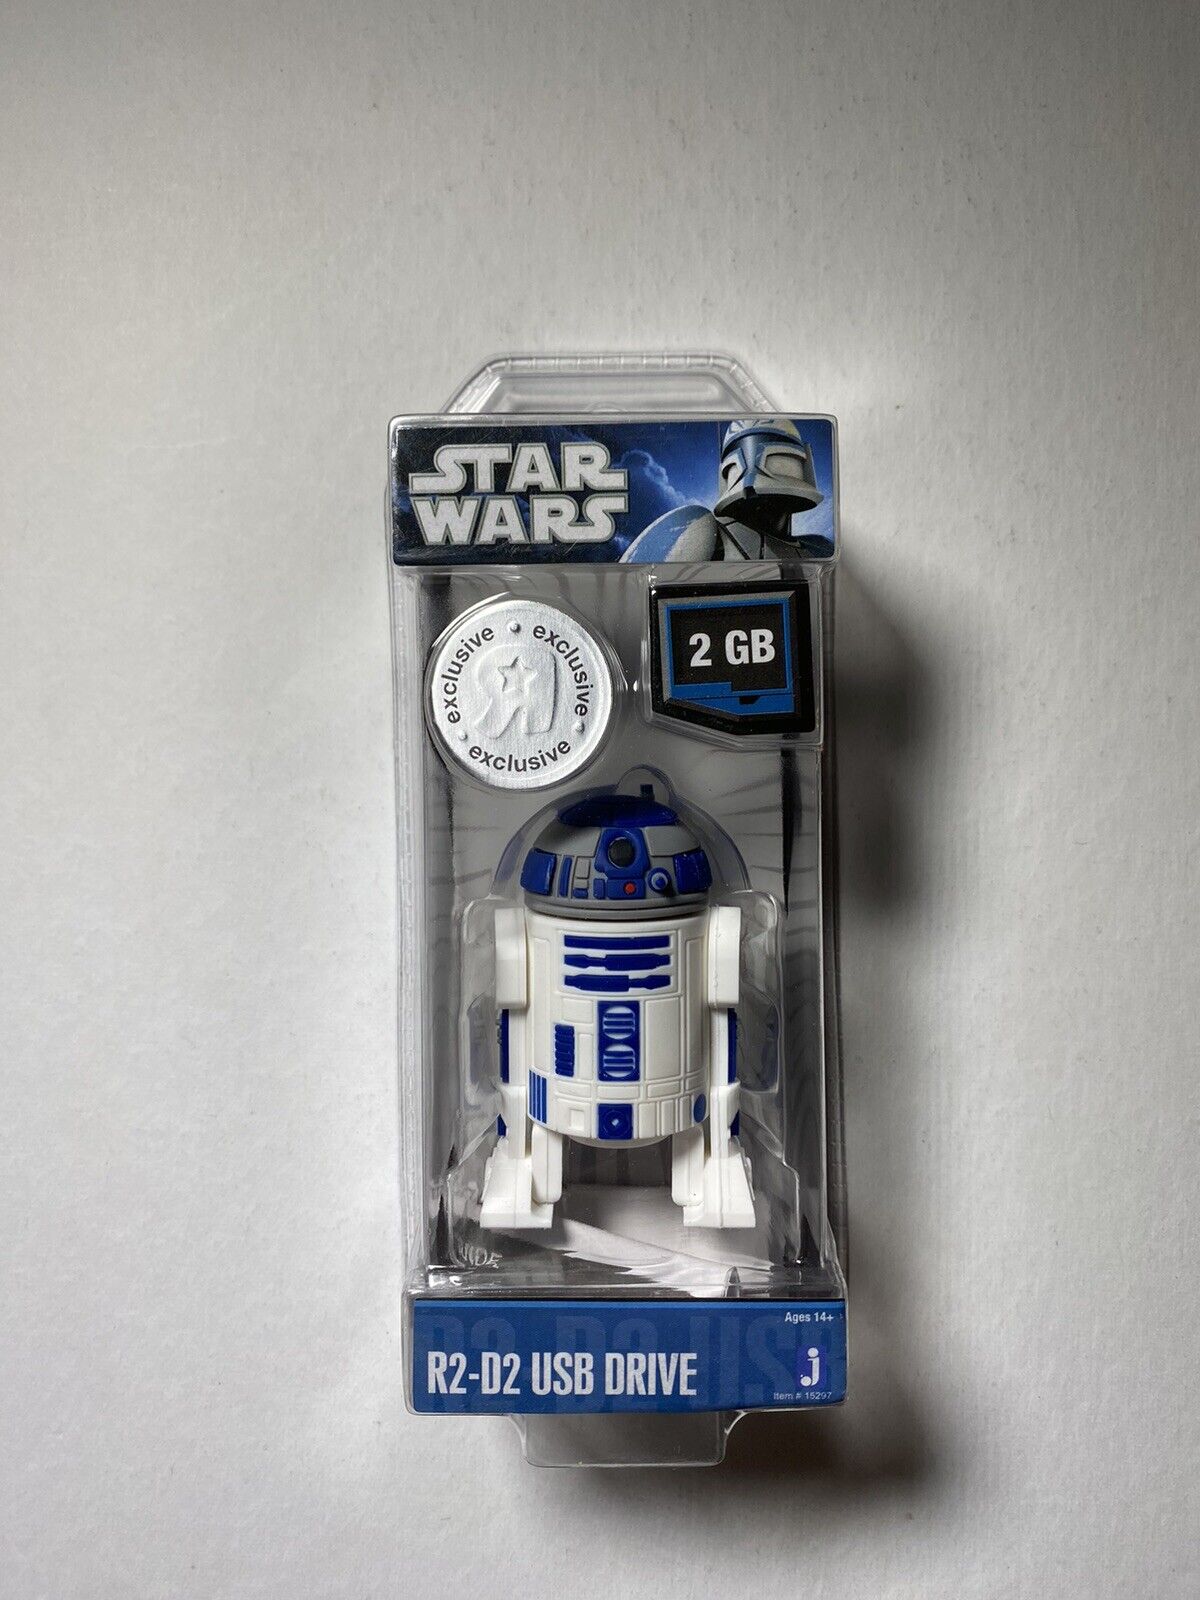 Star Wars 2GB R2-D2 USB Drive Toys R Us Exclusive SEALED Great Gift